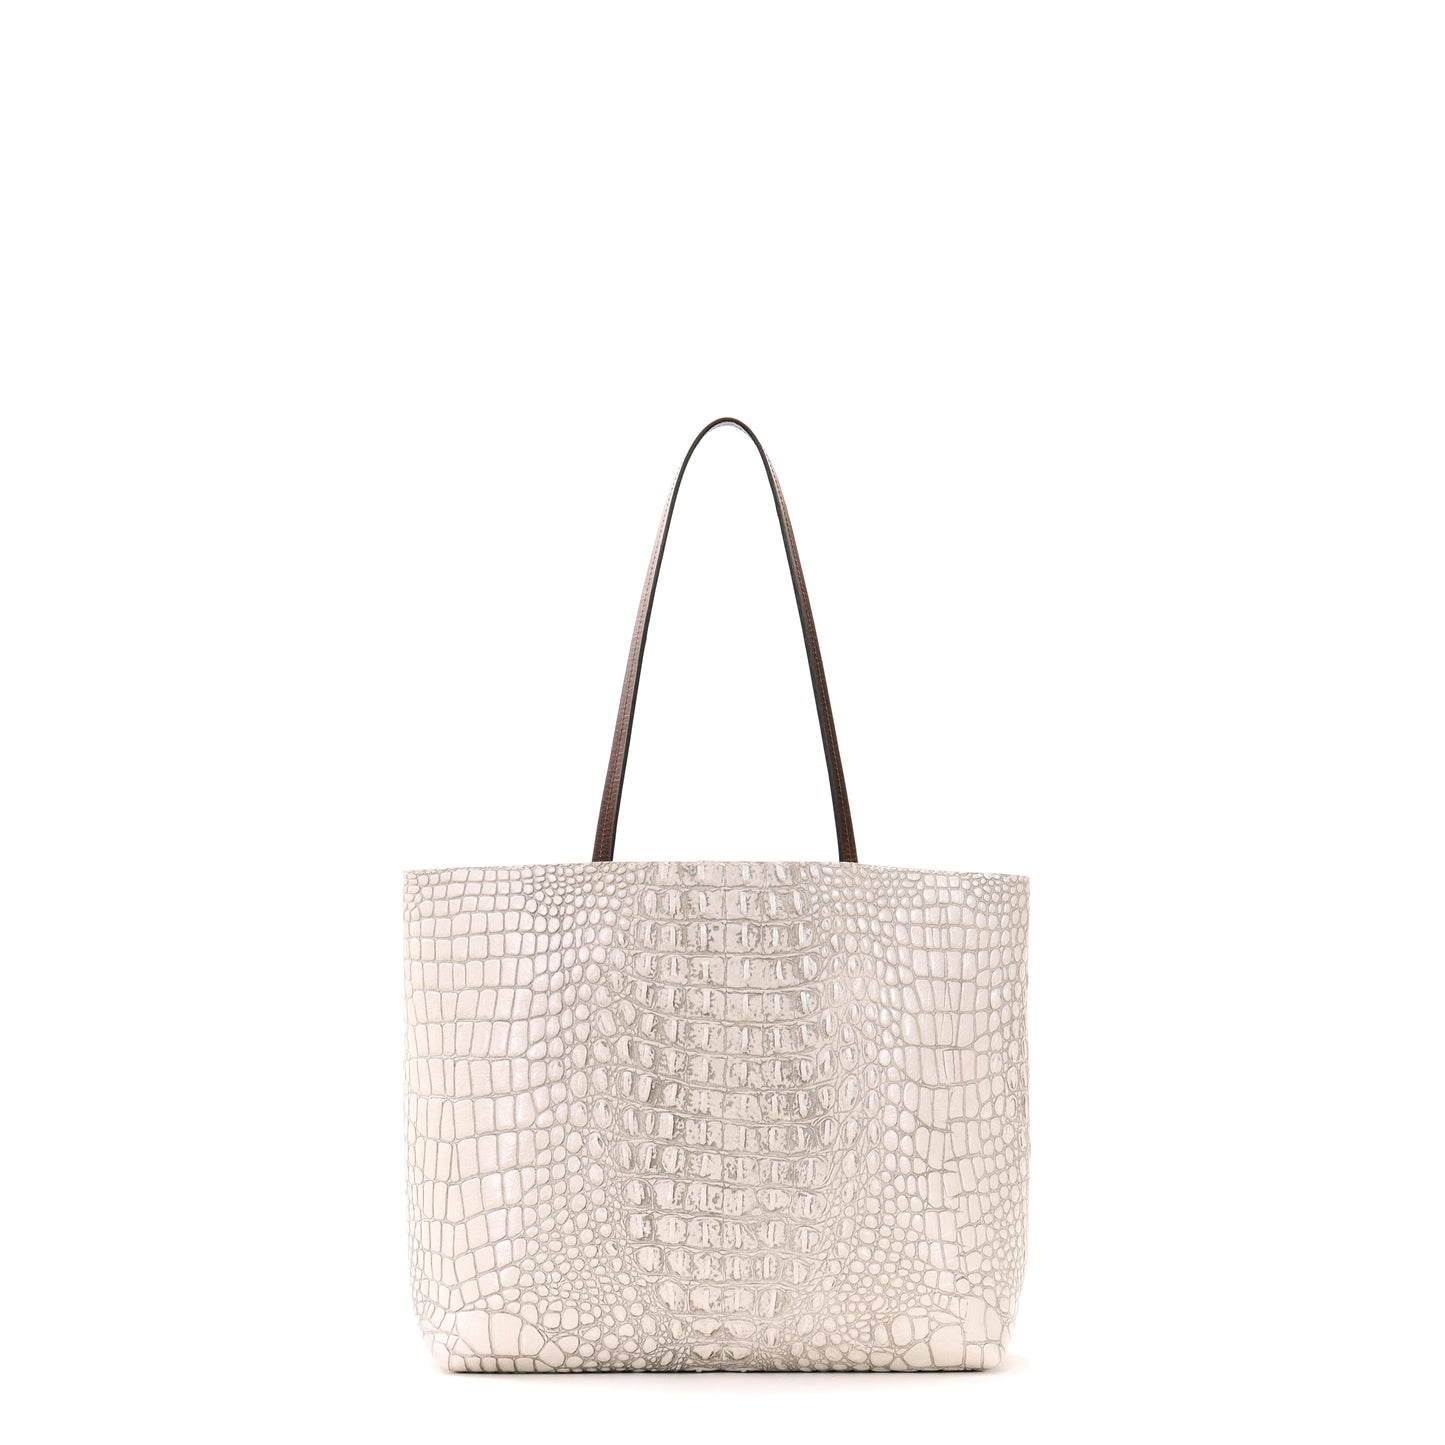 ESSENTIAL TOTE OYSTER EMBOSSED CROC